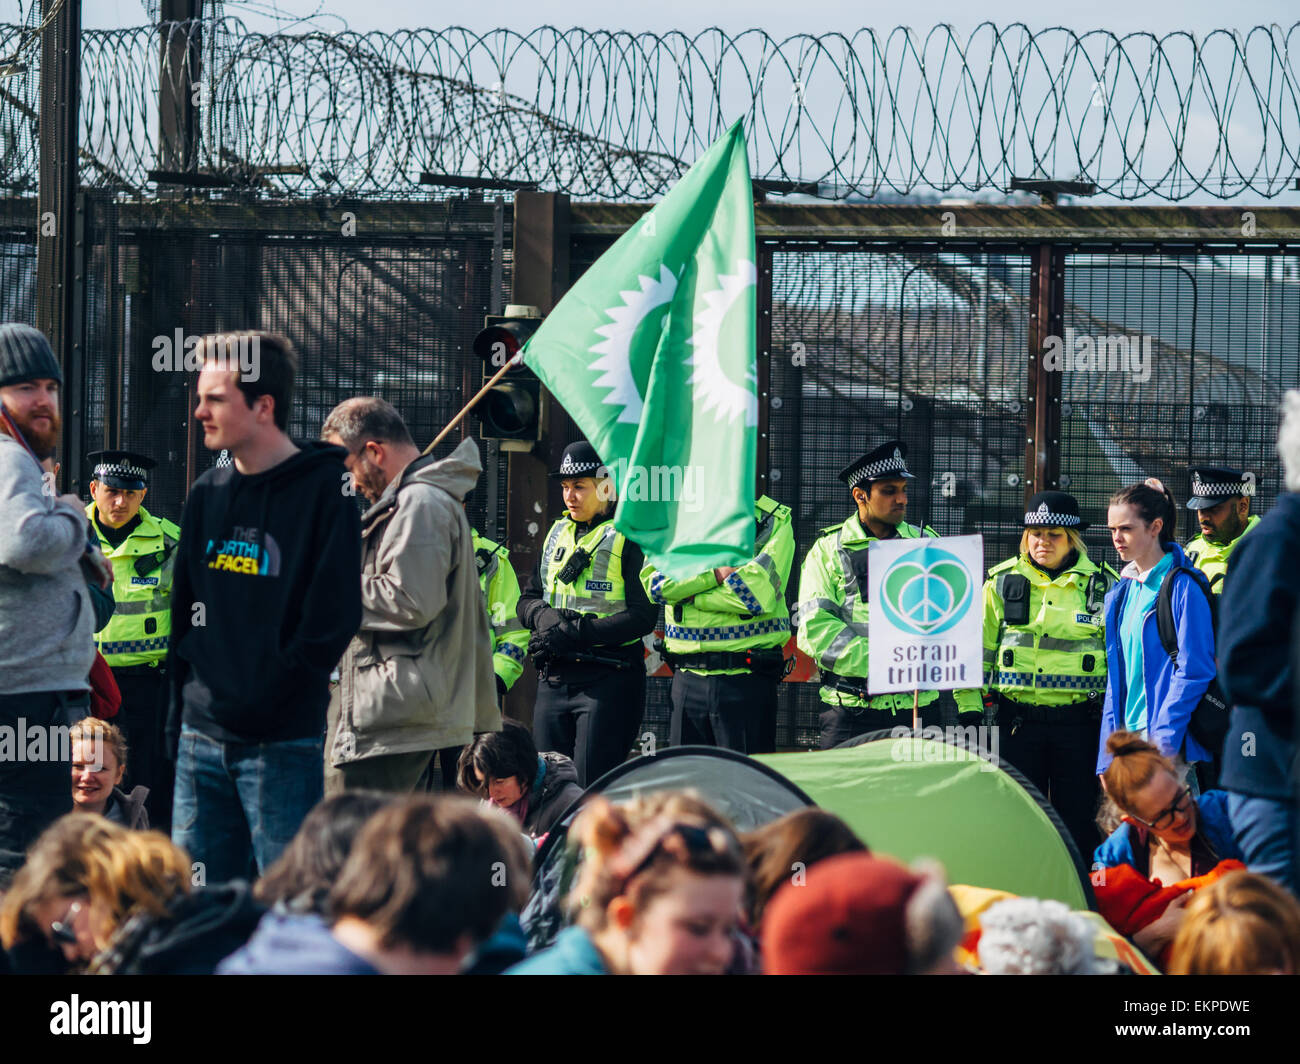 Glasgow, UK. 13th April, 2015. Protestors of all ages gather at Faslane Naval base in Glasgow to capmpaign against the Trident nuclear submarines based there, with the slogans 'Scrap Trident' & #BairnsNotBombs. Credit:  Alan Robertson/Alamy Live News Stock Photo